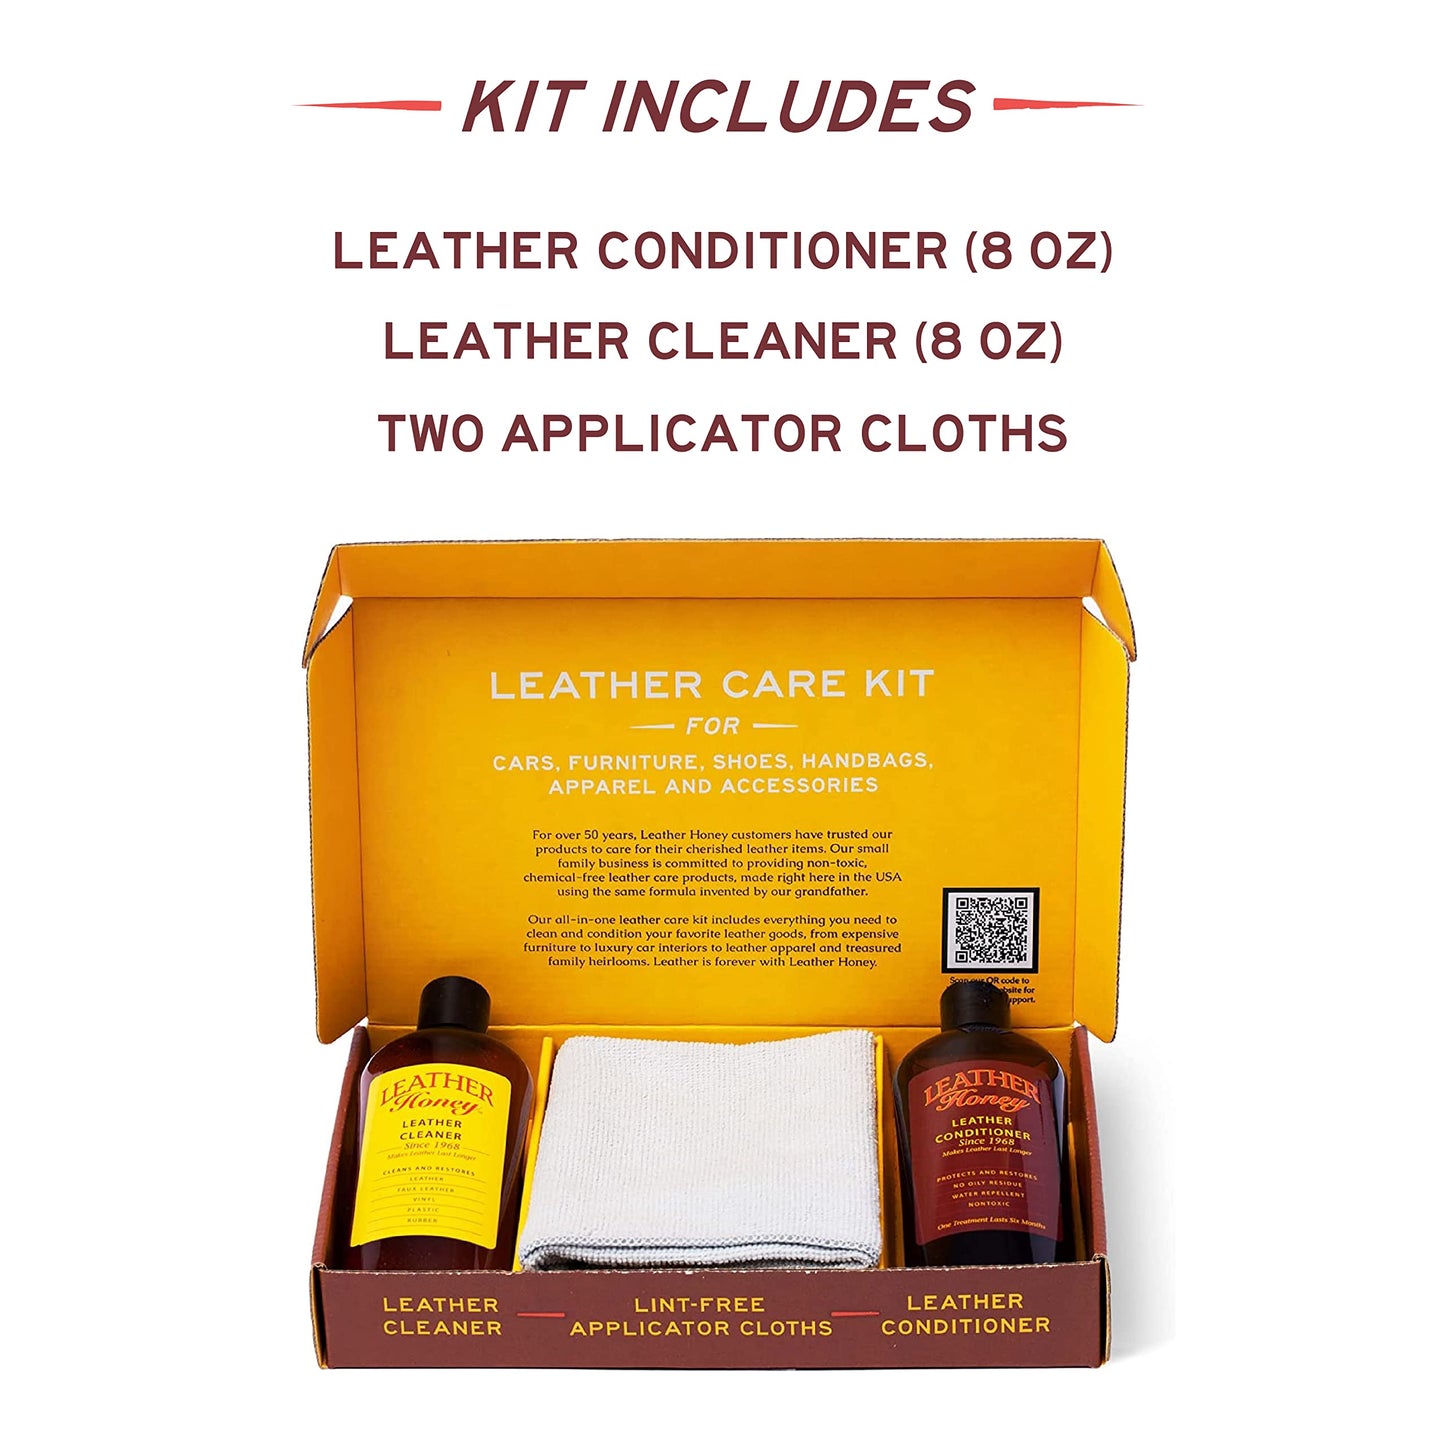 Leather Honey Complete Leather Care Kit Including Conditioner (8 oz), Cleaner (8 oz) and Two Applicator Cloths for use on Leather Apparel, Furniture, Auto Interiors, Shoes, Bags